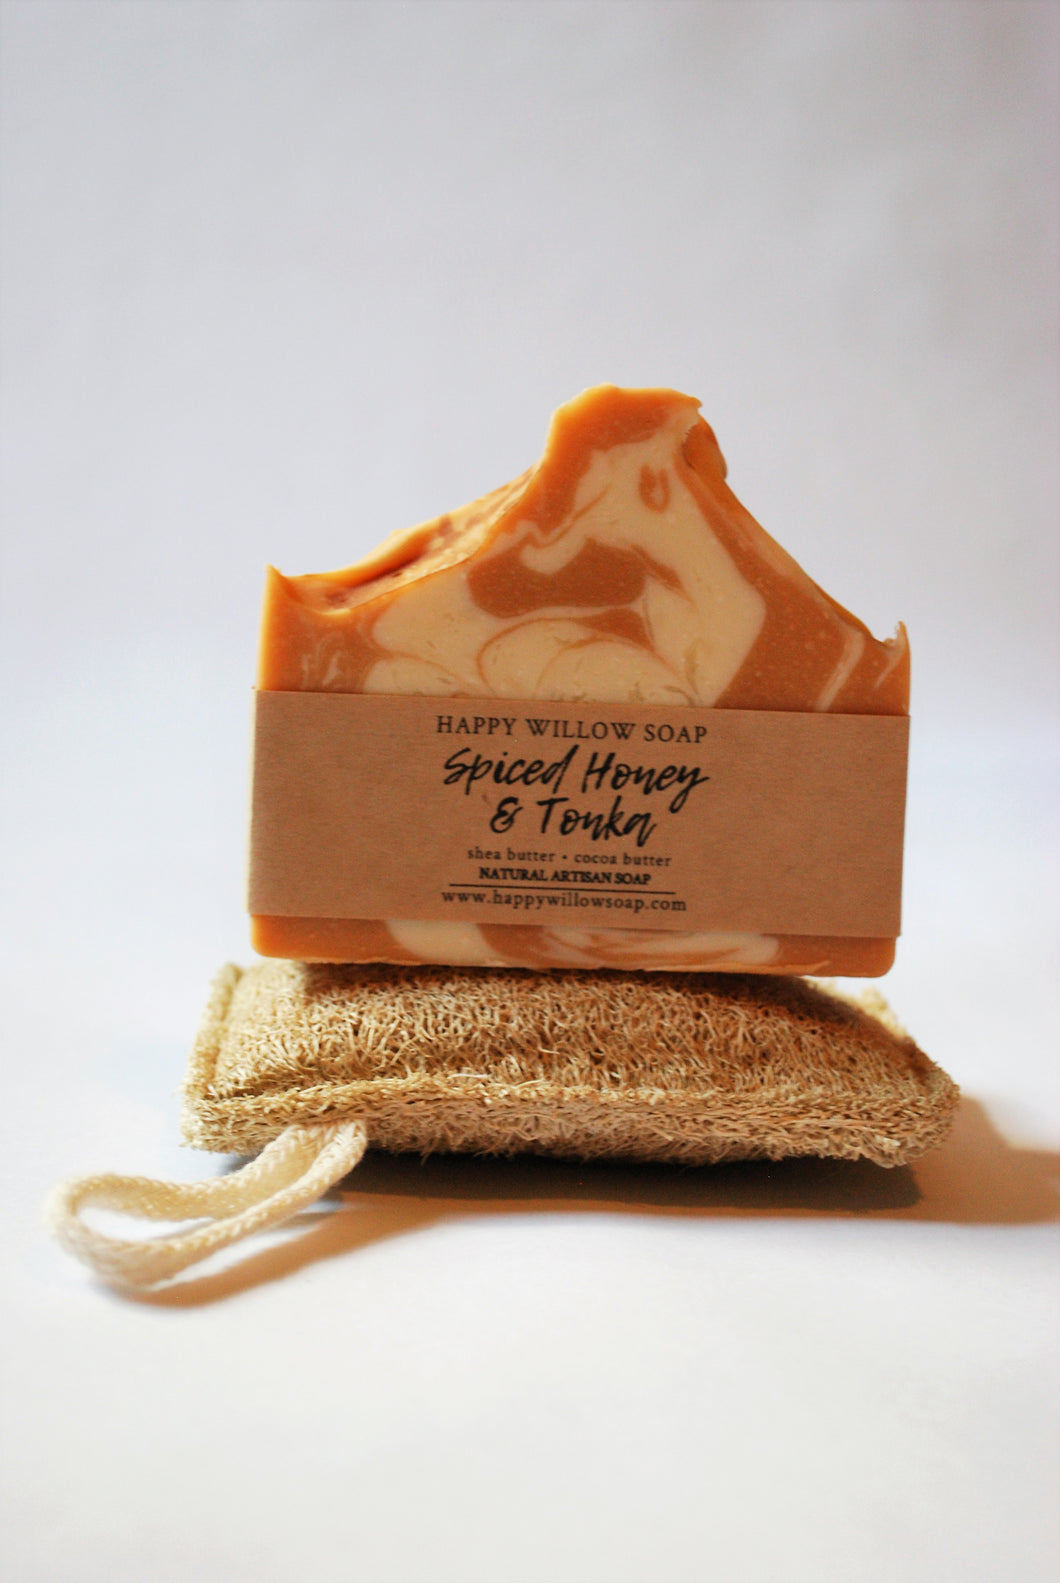 Body Soap Bar by Happy Willow Soaps - Local, Plastic-free, Non-toxic, Vegan, Cruelty-free